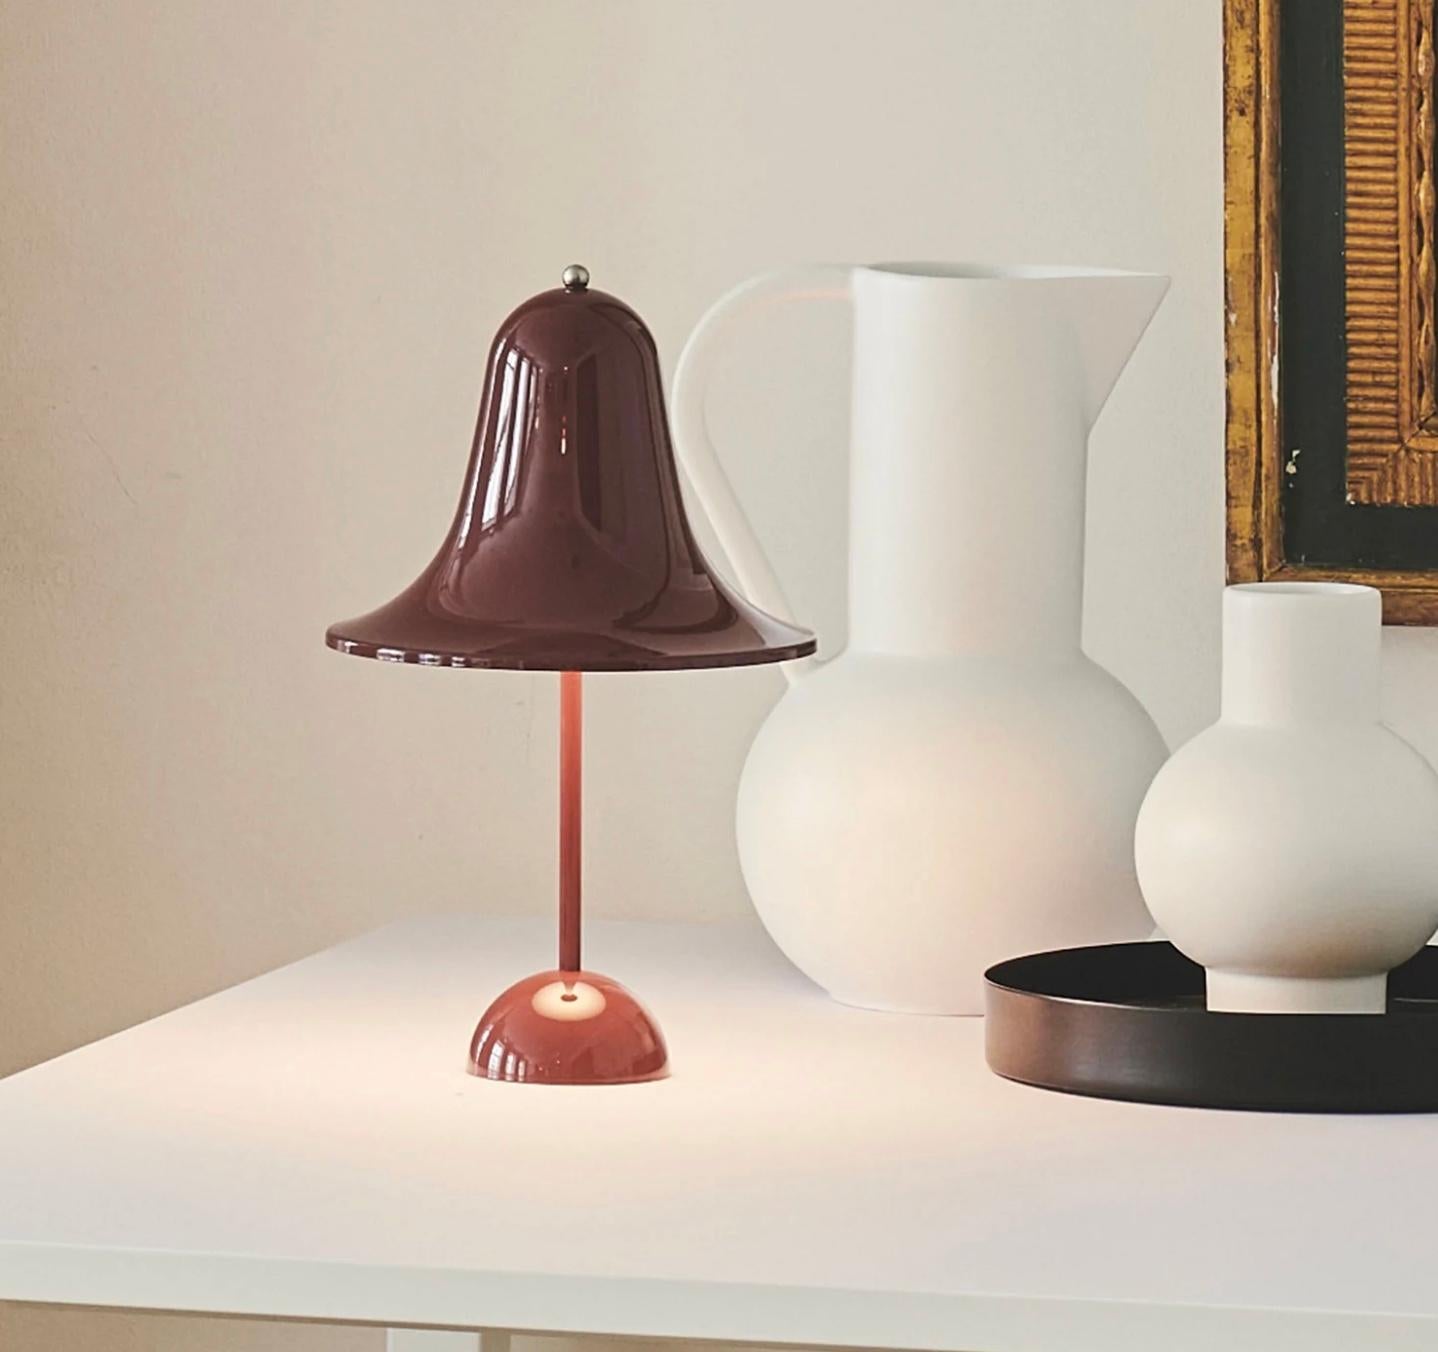 Verner Panton 'Pantop Portable' table lamp in 'Burgundy' for Verpan. Designed in 1980. New, current production.

This is a versatile smaller and wireless version of the 'Pantop' table lamp, usb-chargeable. 

The elegant Pantop line was designed